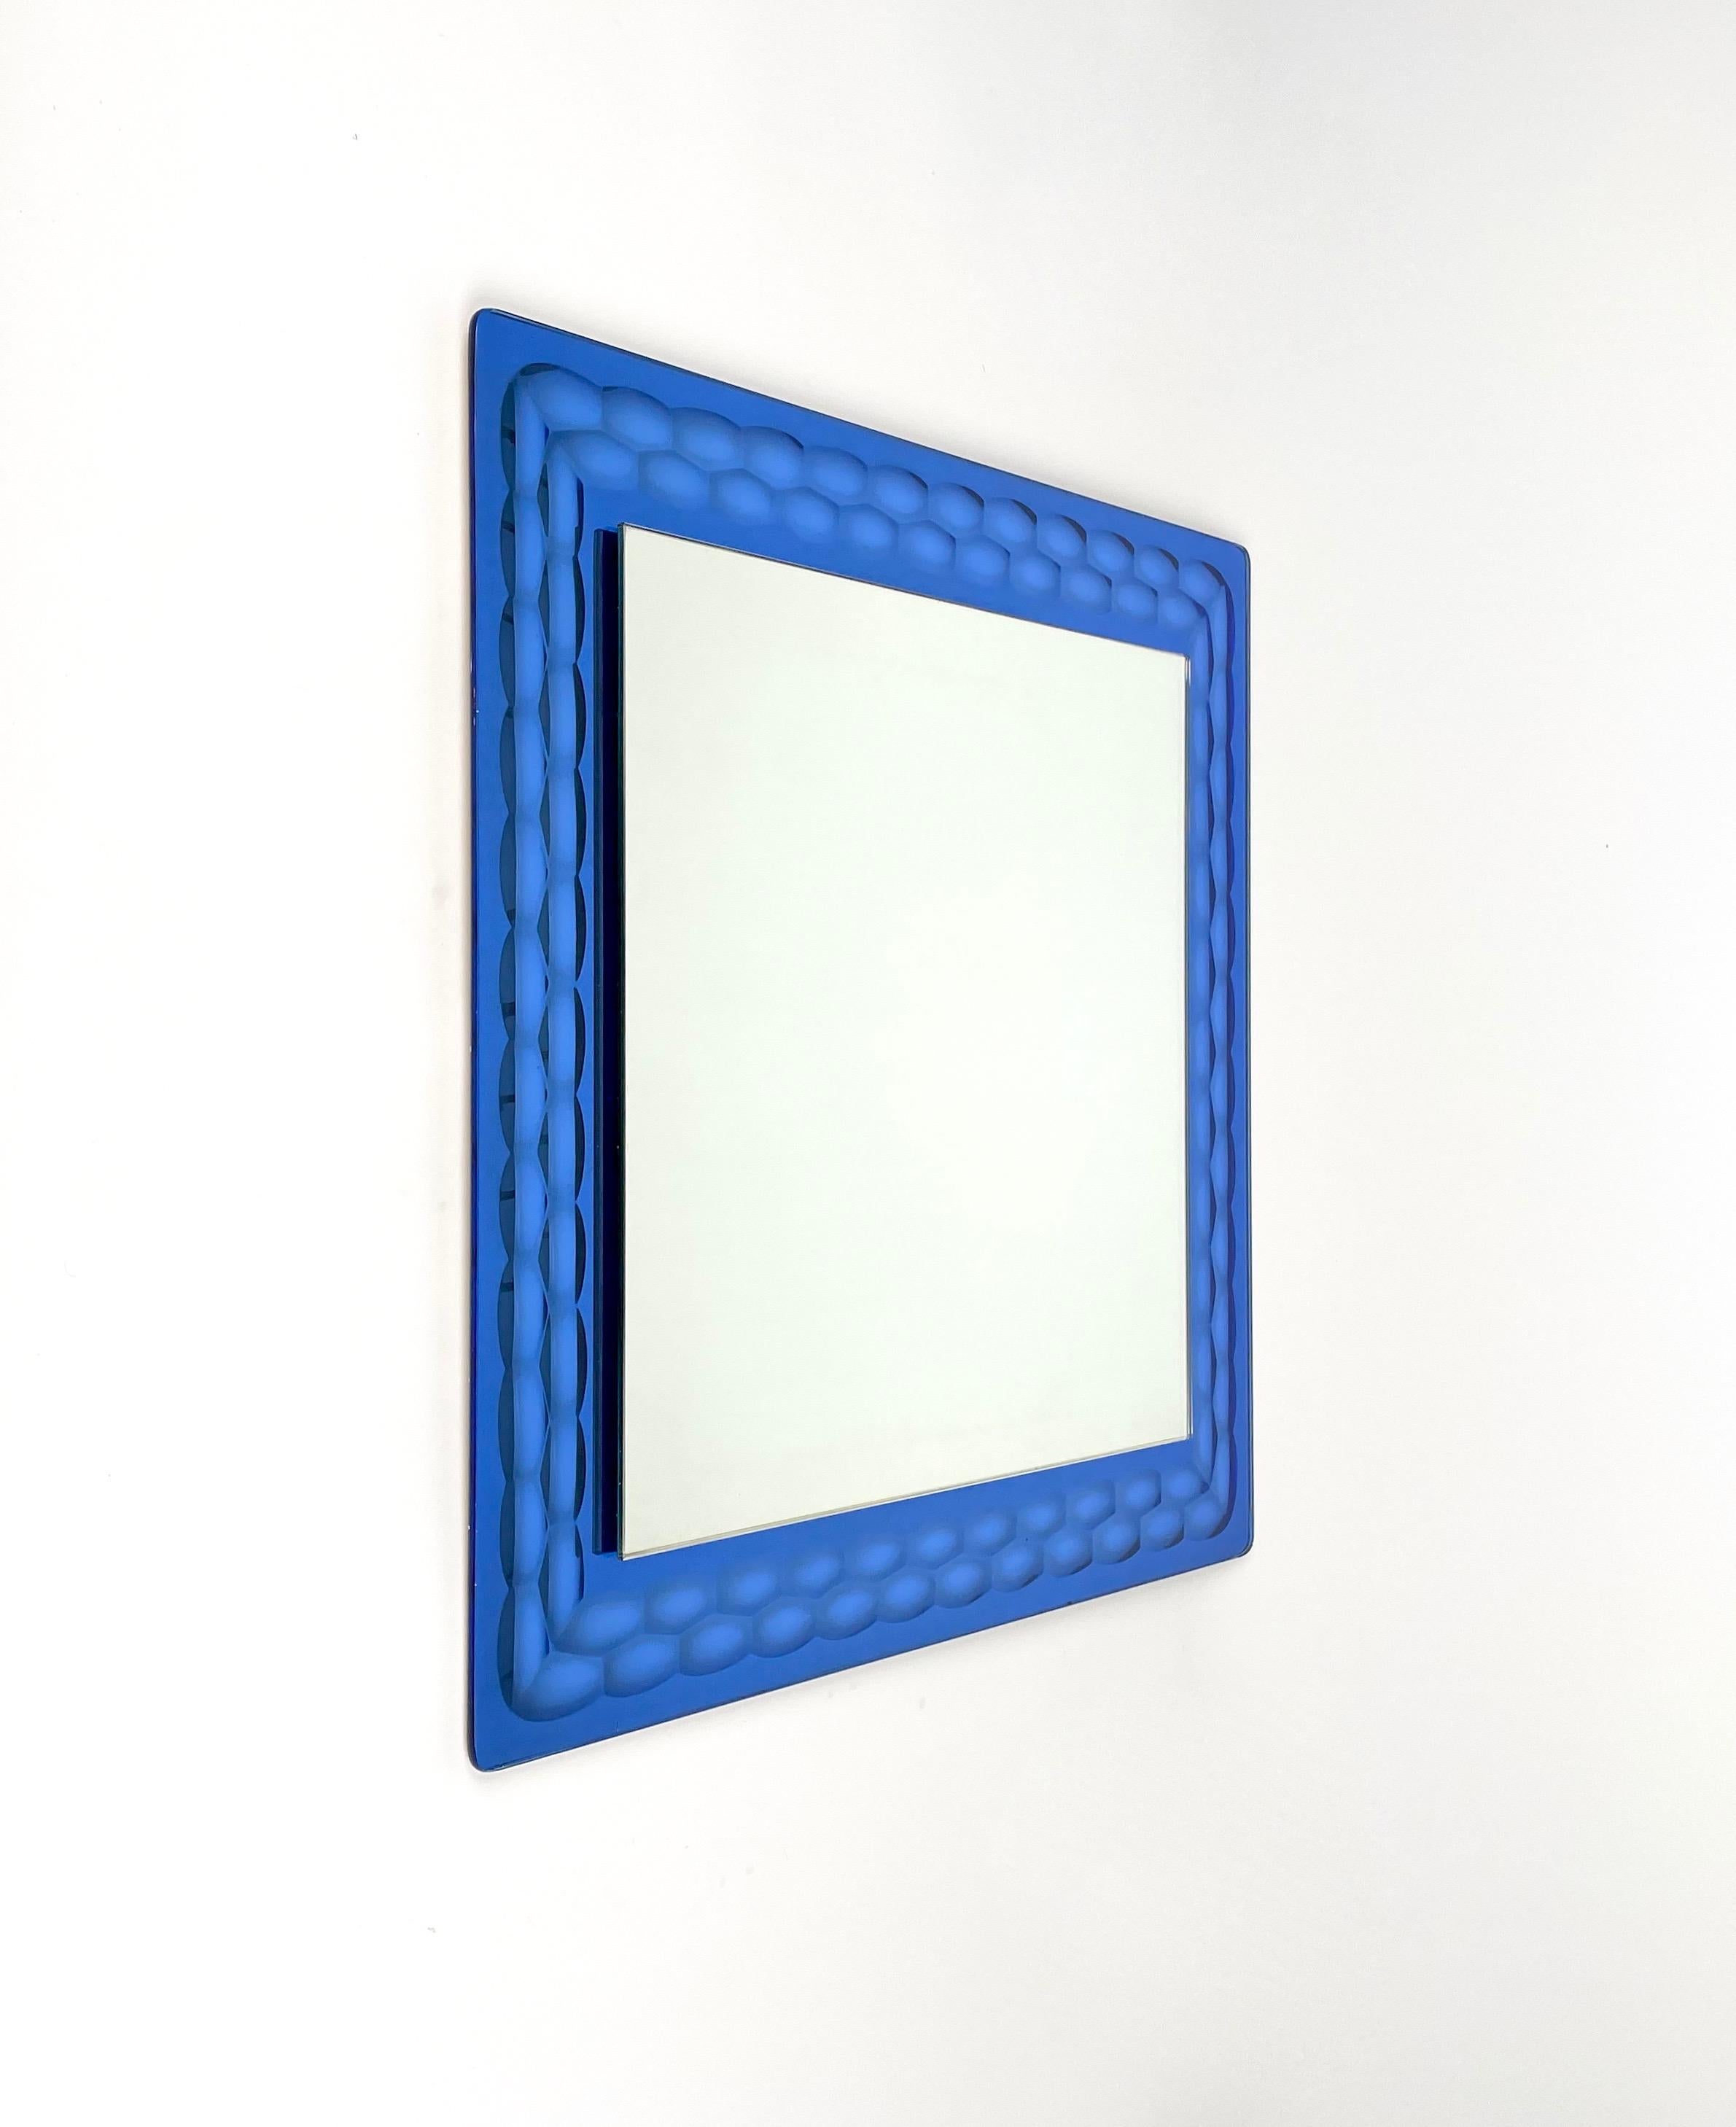 Italian Squared Blue Wall Mirror by Lupi Cristal Luxor, Italy, 1960s For Sale